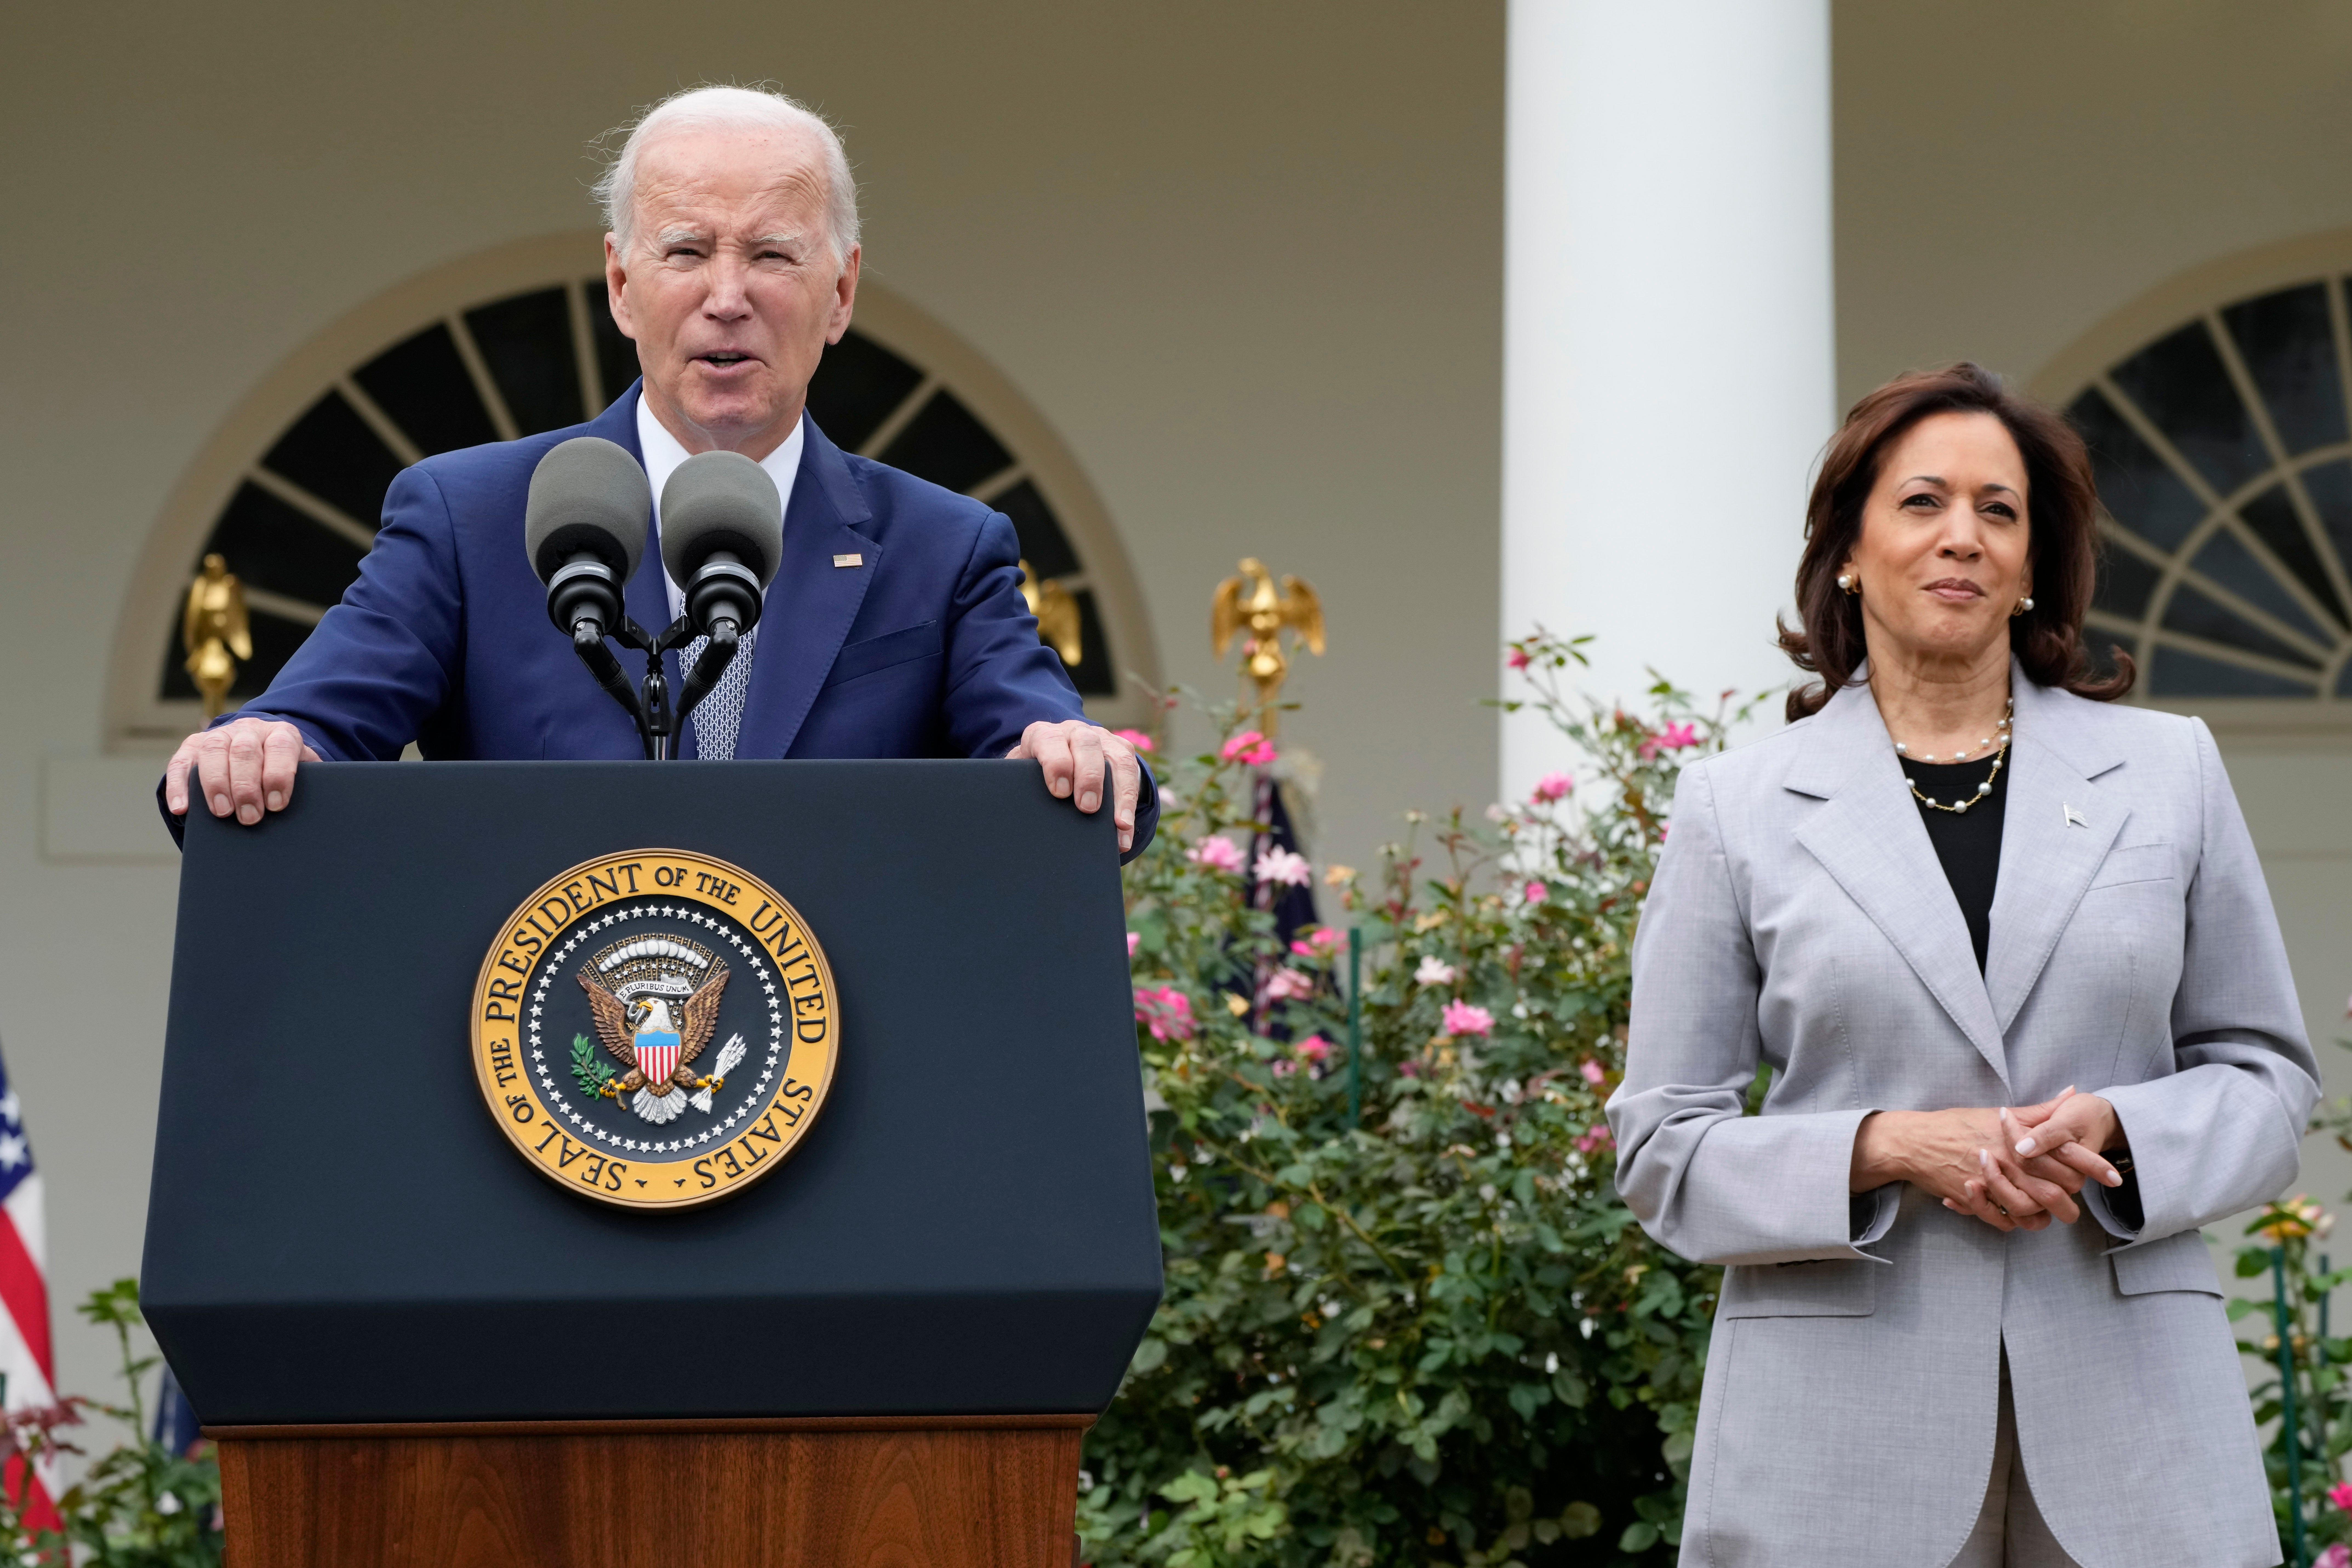 Biden is perceived to lack the stamina for a race against a ruthless bully